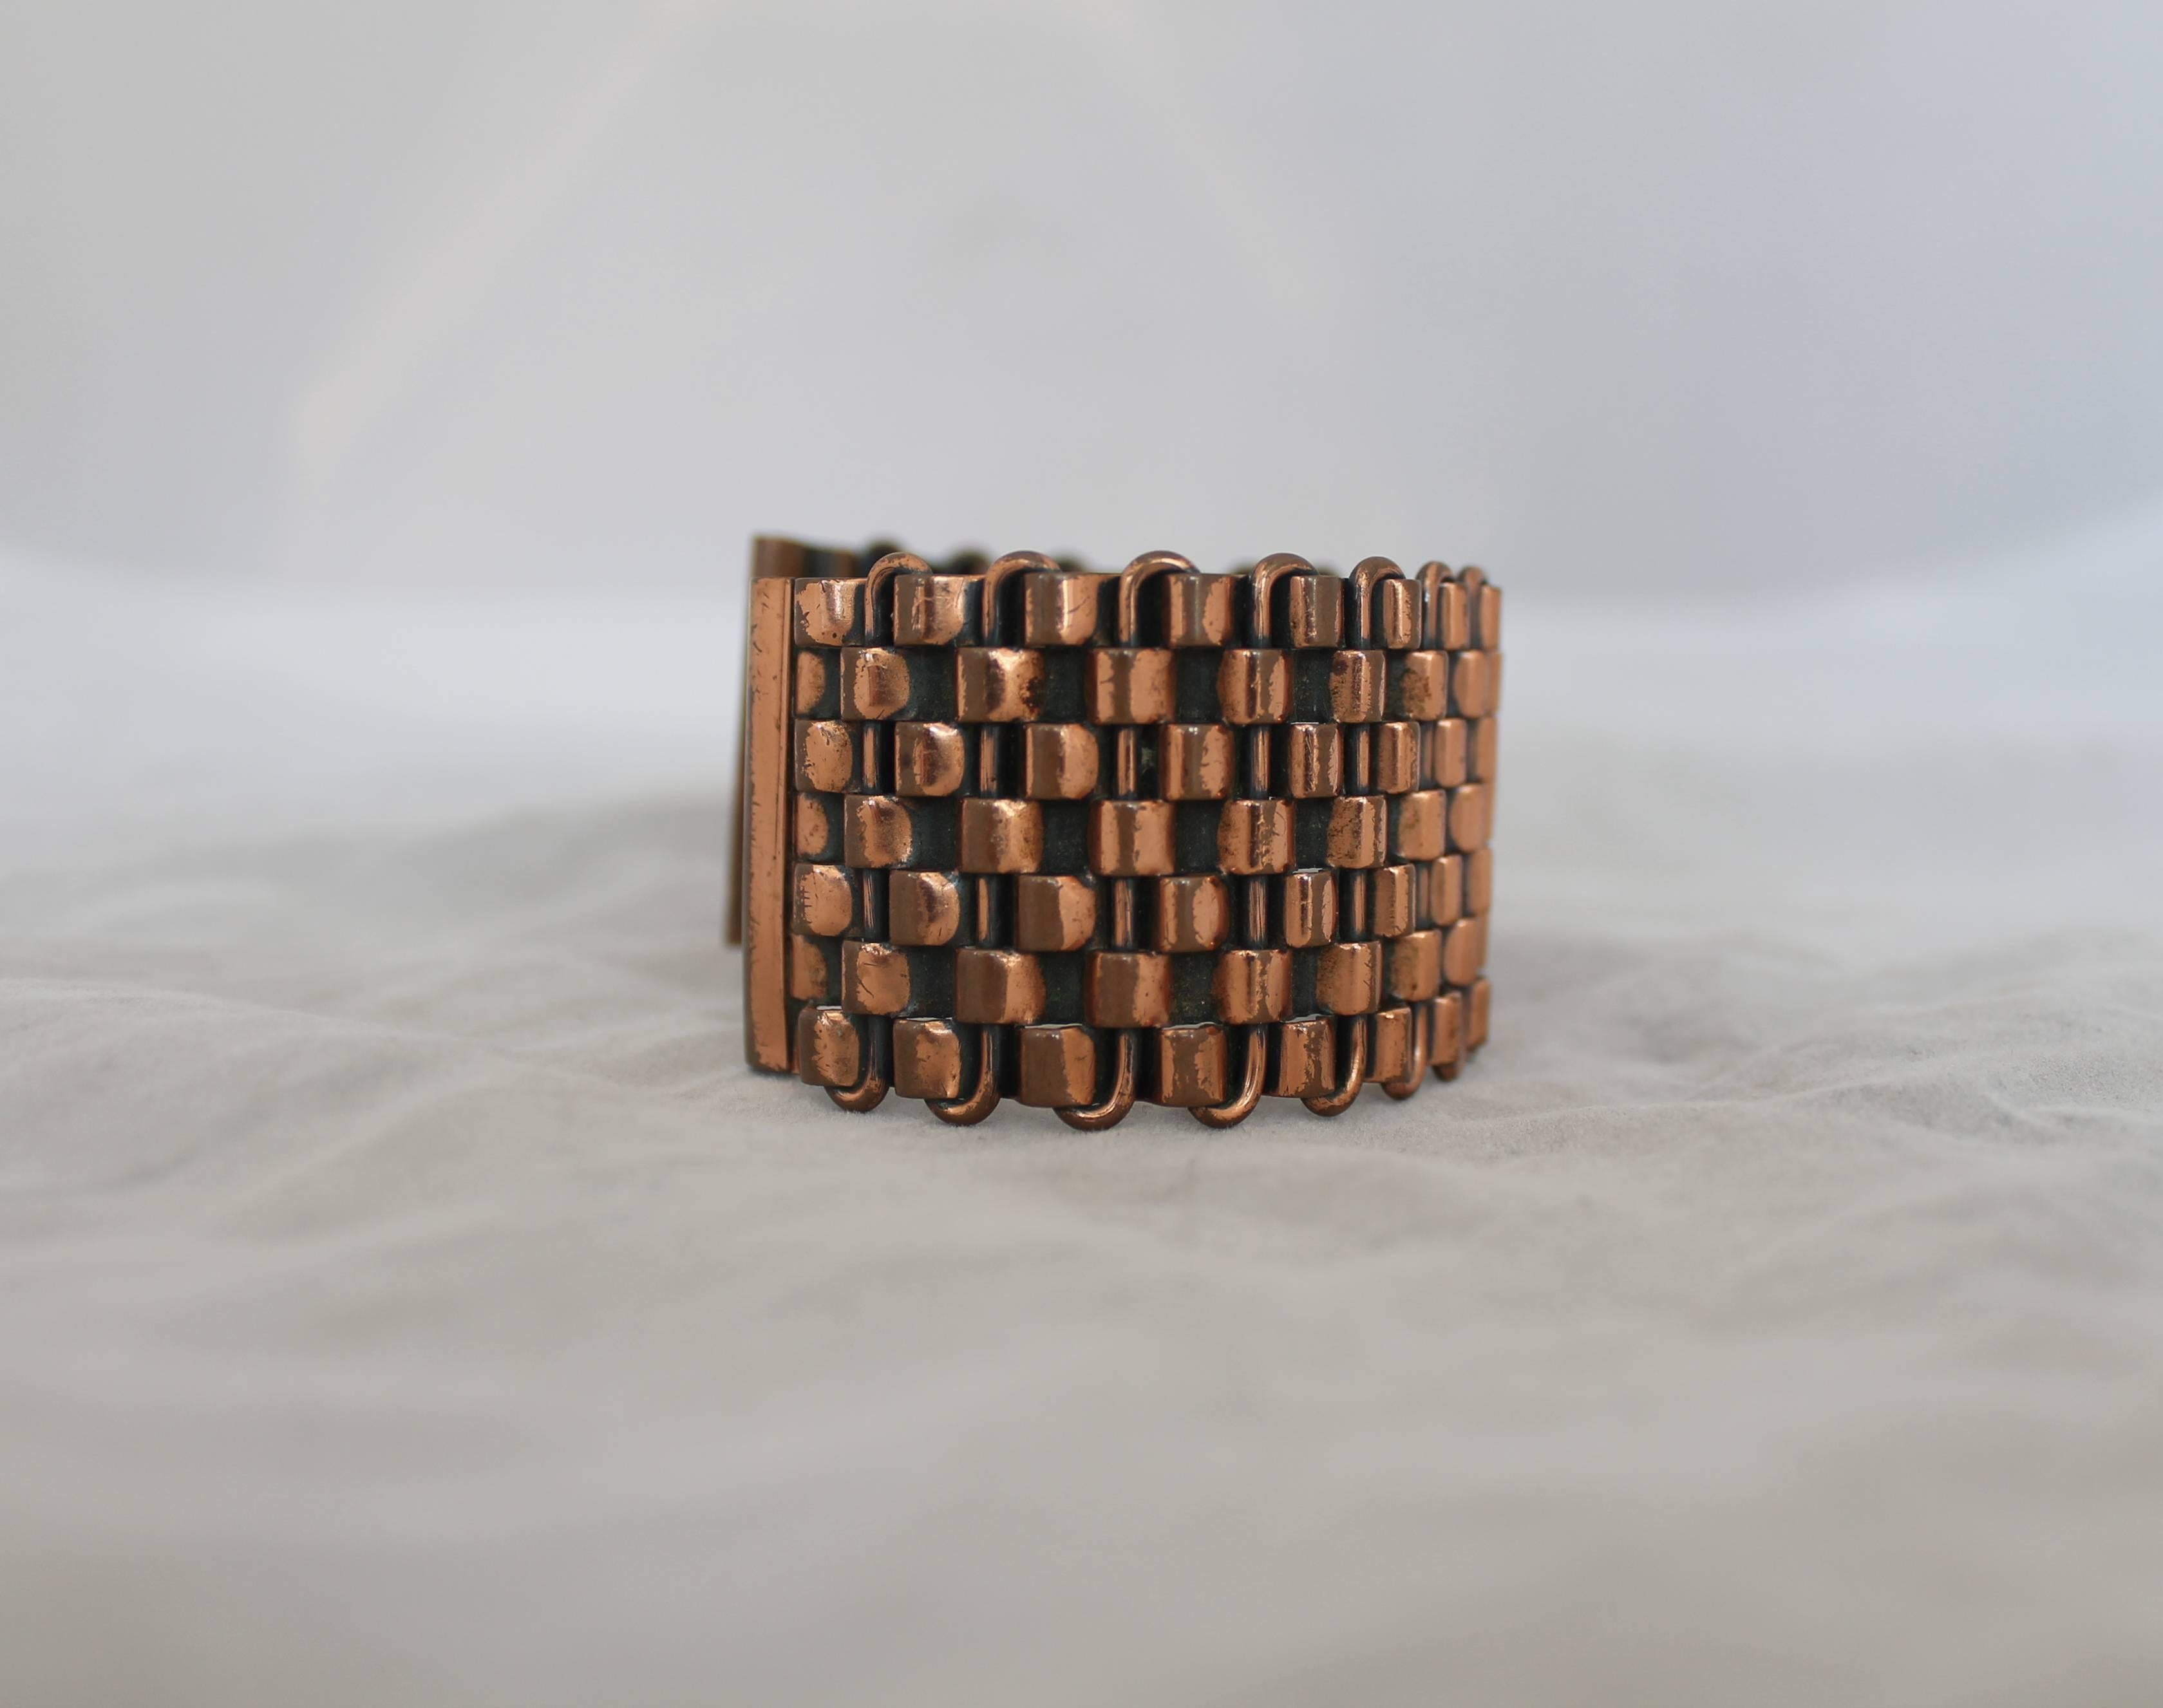 Renoir Vintage Copper Basket Weave Cuff Bracelet - 1950's.  This bracelet is in very good vintage condition with only some minor wear consistent with age.  It features an intricate basket weave look, the 